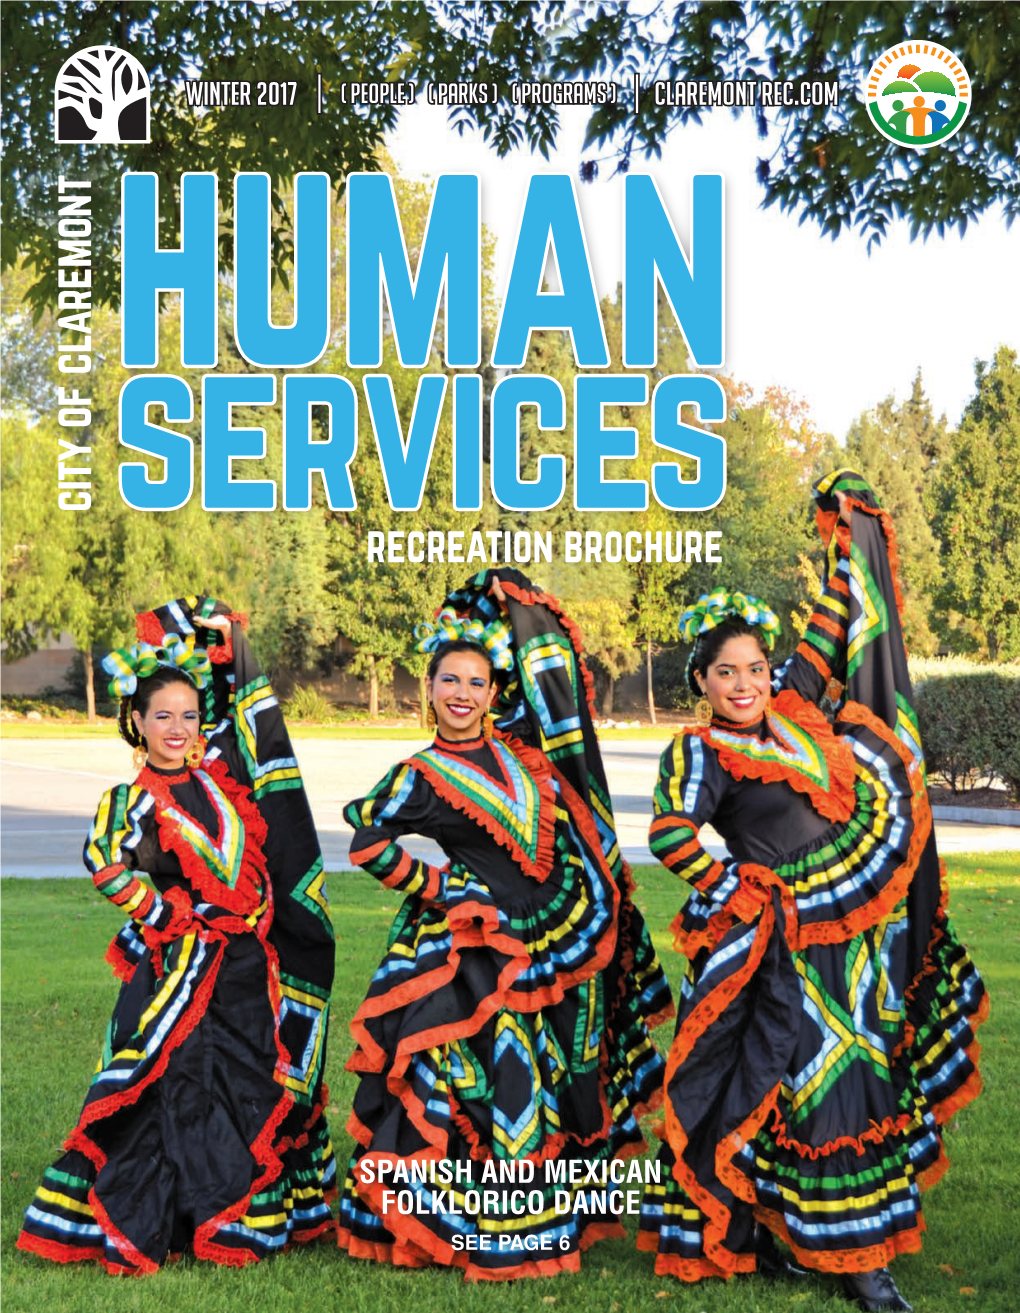 SPANISH and MEXICAN FOLKLORICO DANCE SEE PAGE 6 CLAREMONT HUMAN SERVICES Cre Ing CoUnY People L Parks L Programs